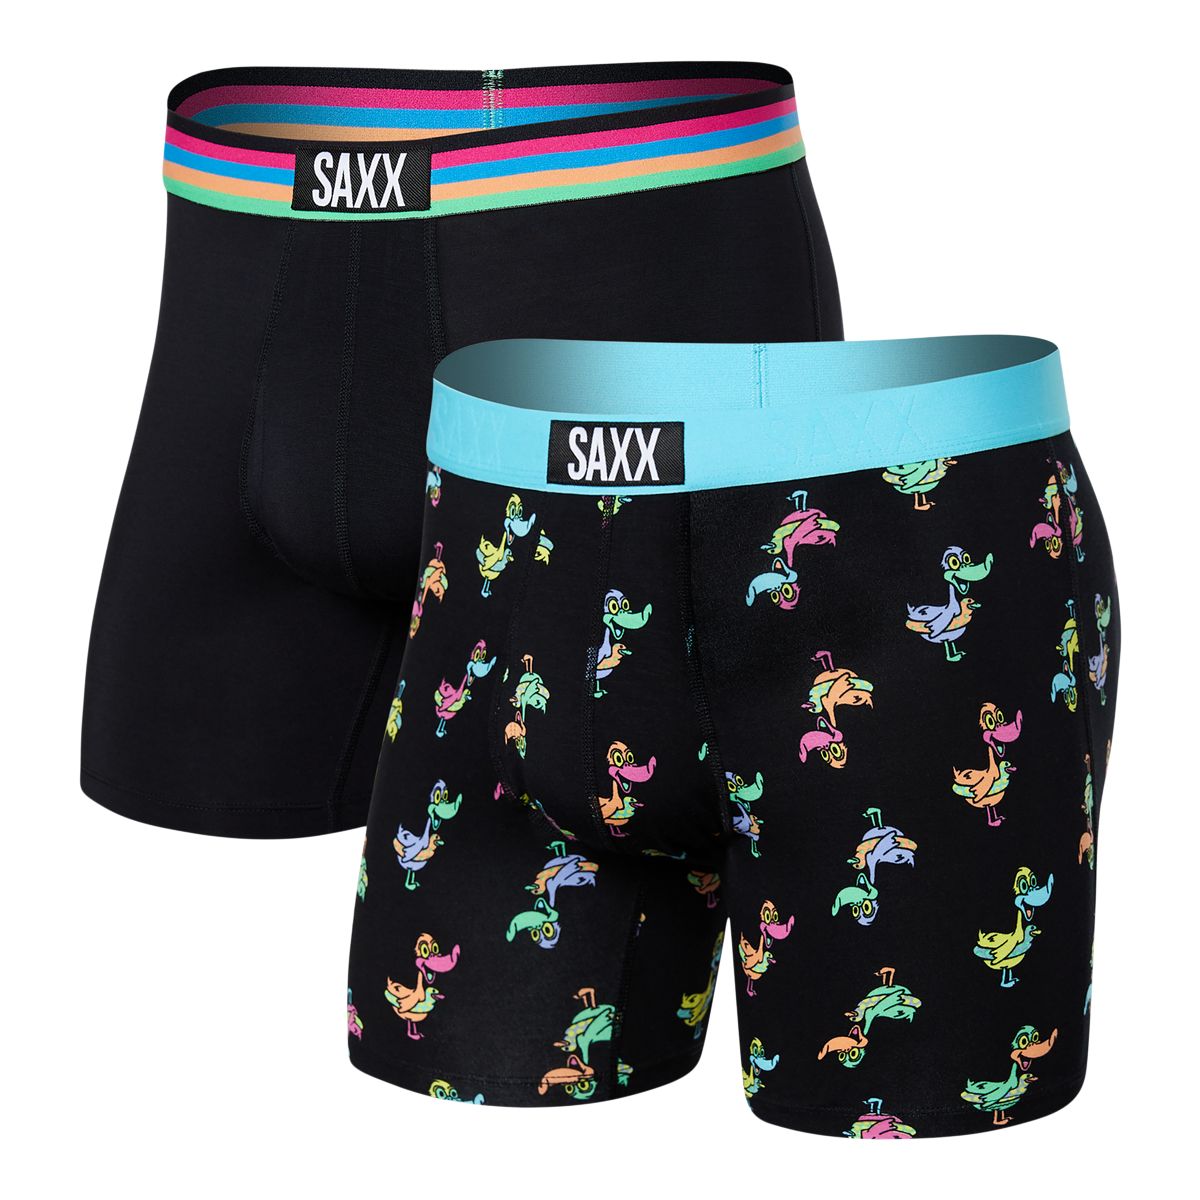 SAXX Ultra Tri-Blend Boxer Fly - Men's Underwear - 2 Pack - Free  Shipping